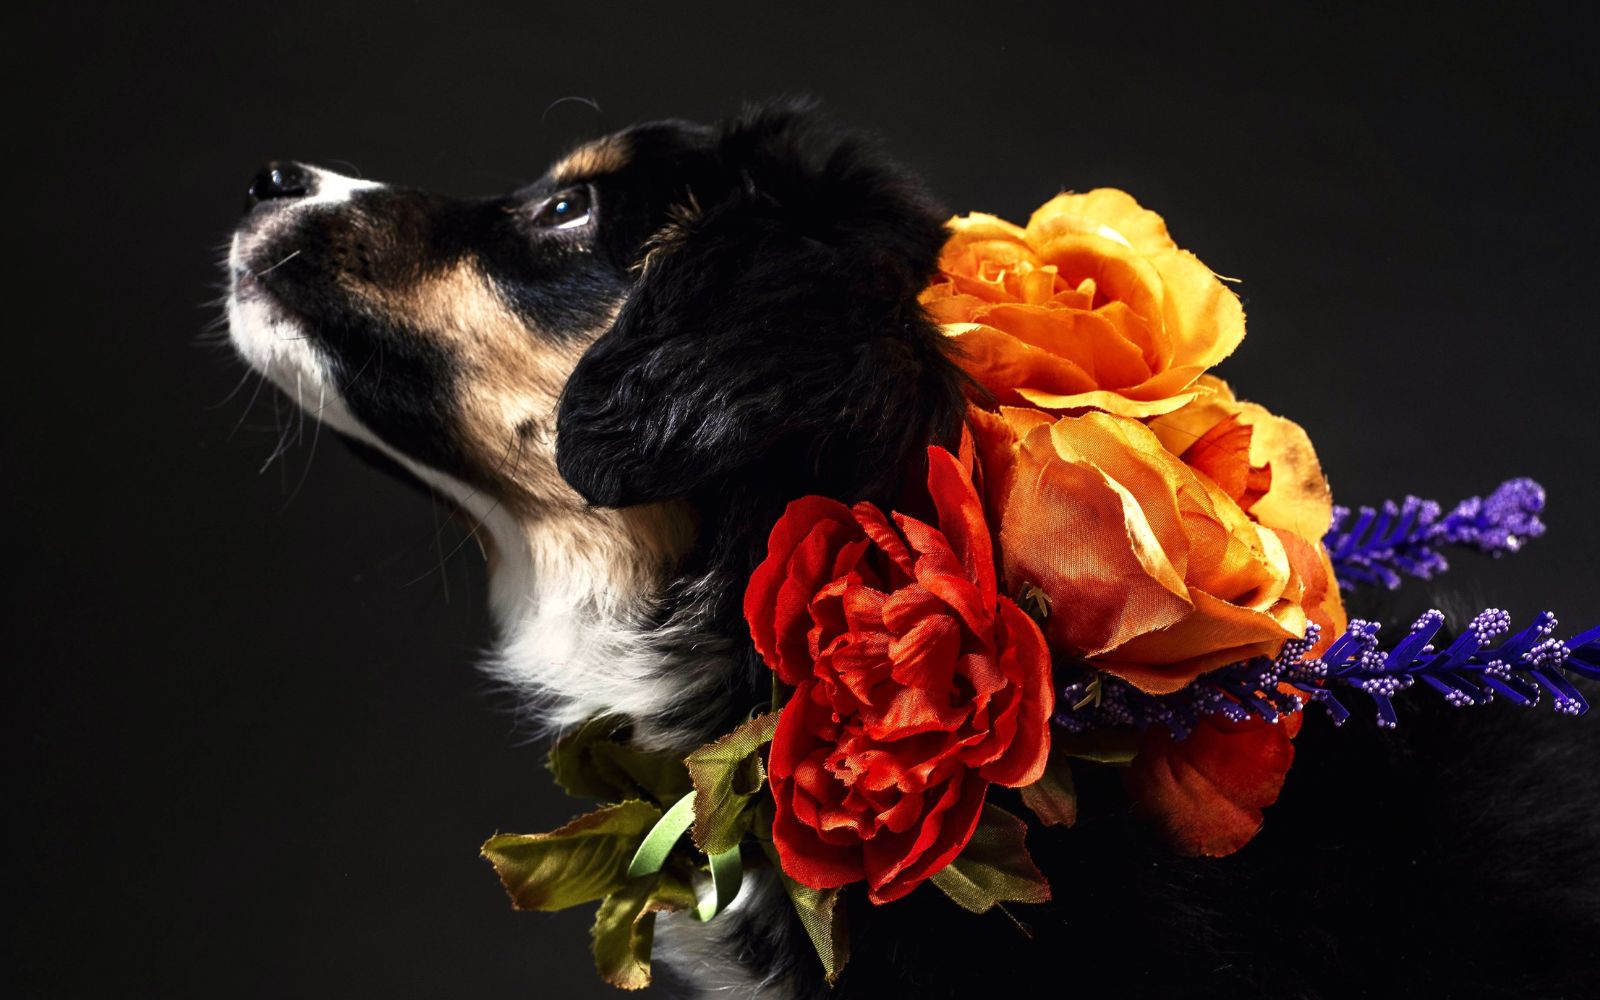 Posh Dog Life online boutique sells chic dog apparel and accessories that let your dog stand out from the pack. Cavalier King Charles Spaniel wears an elaborate floral collar.